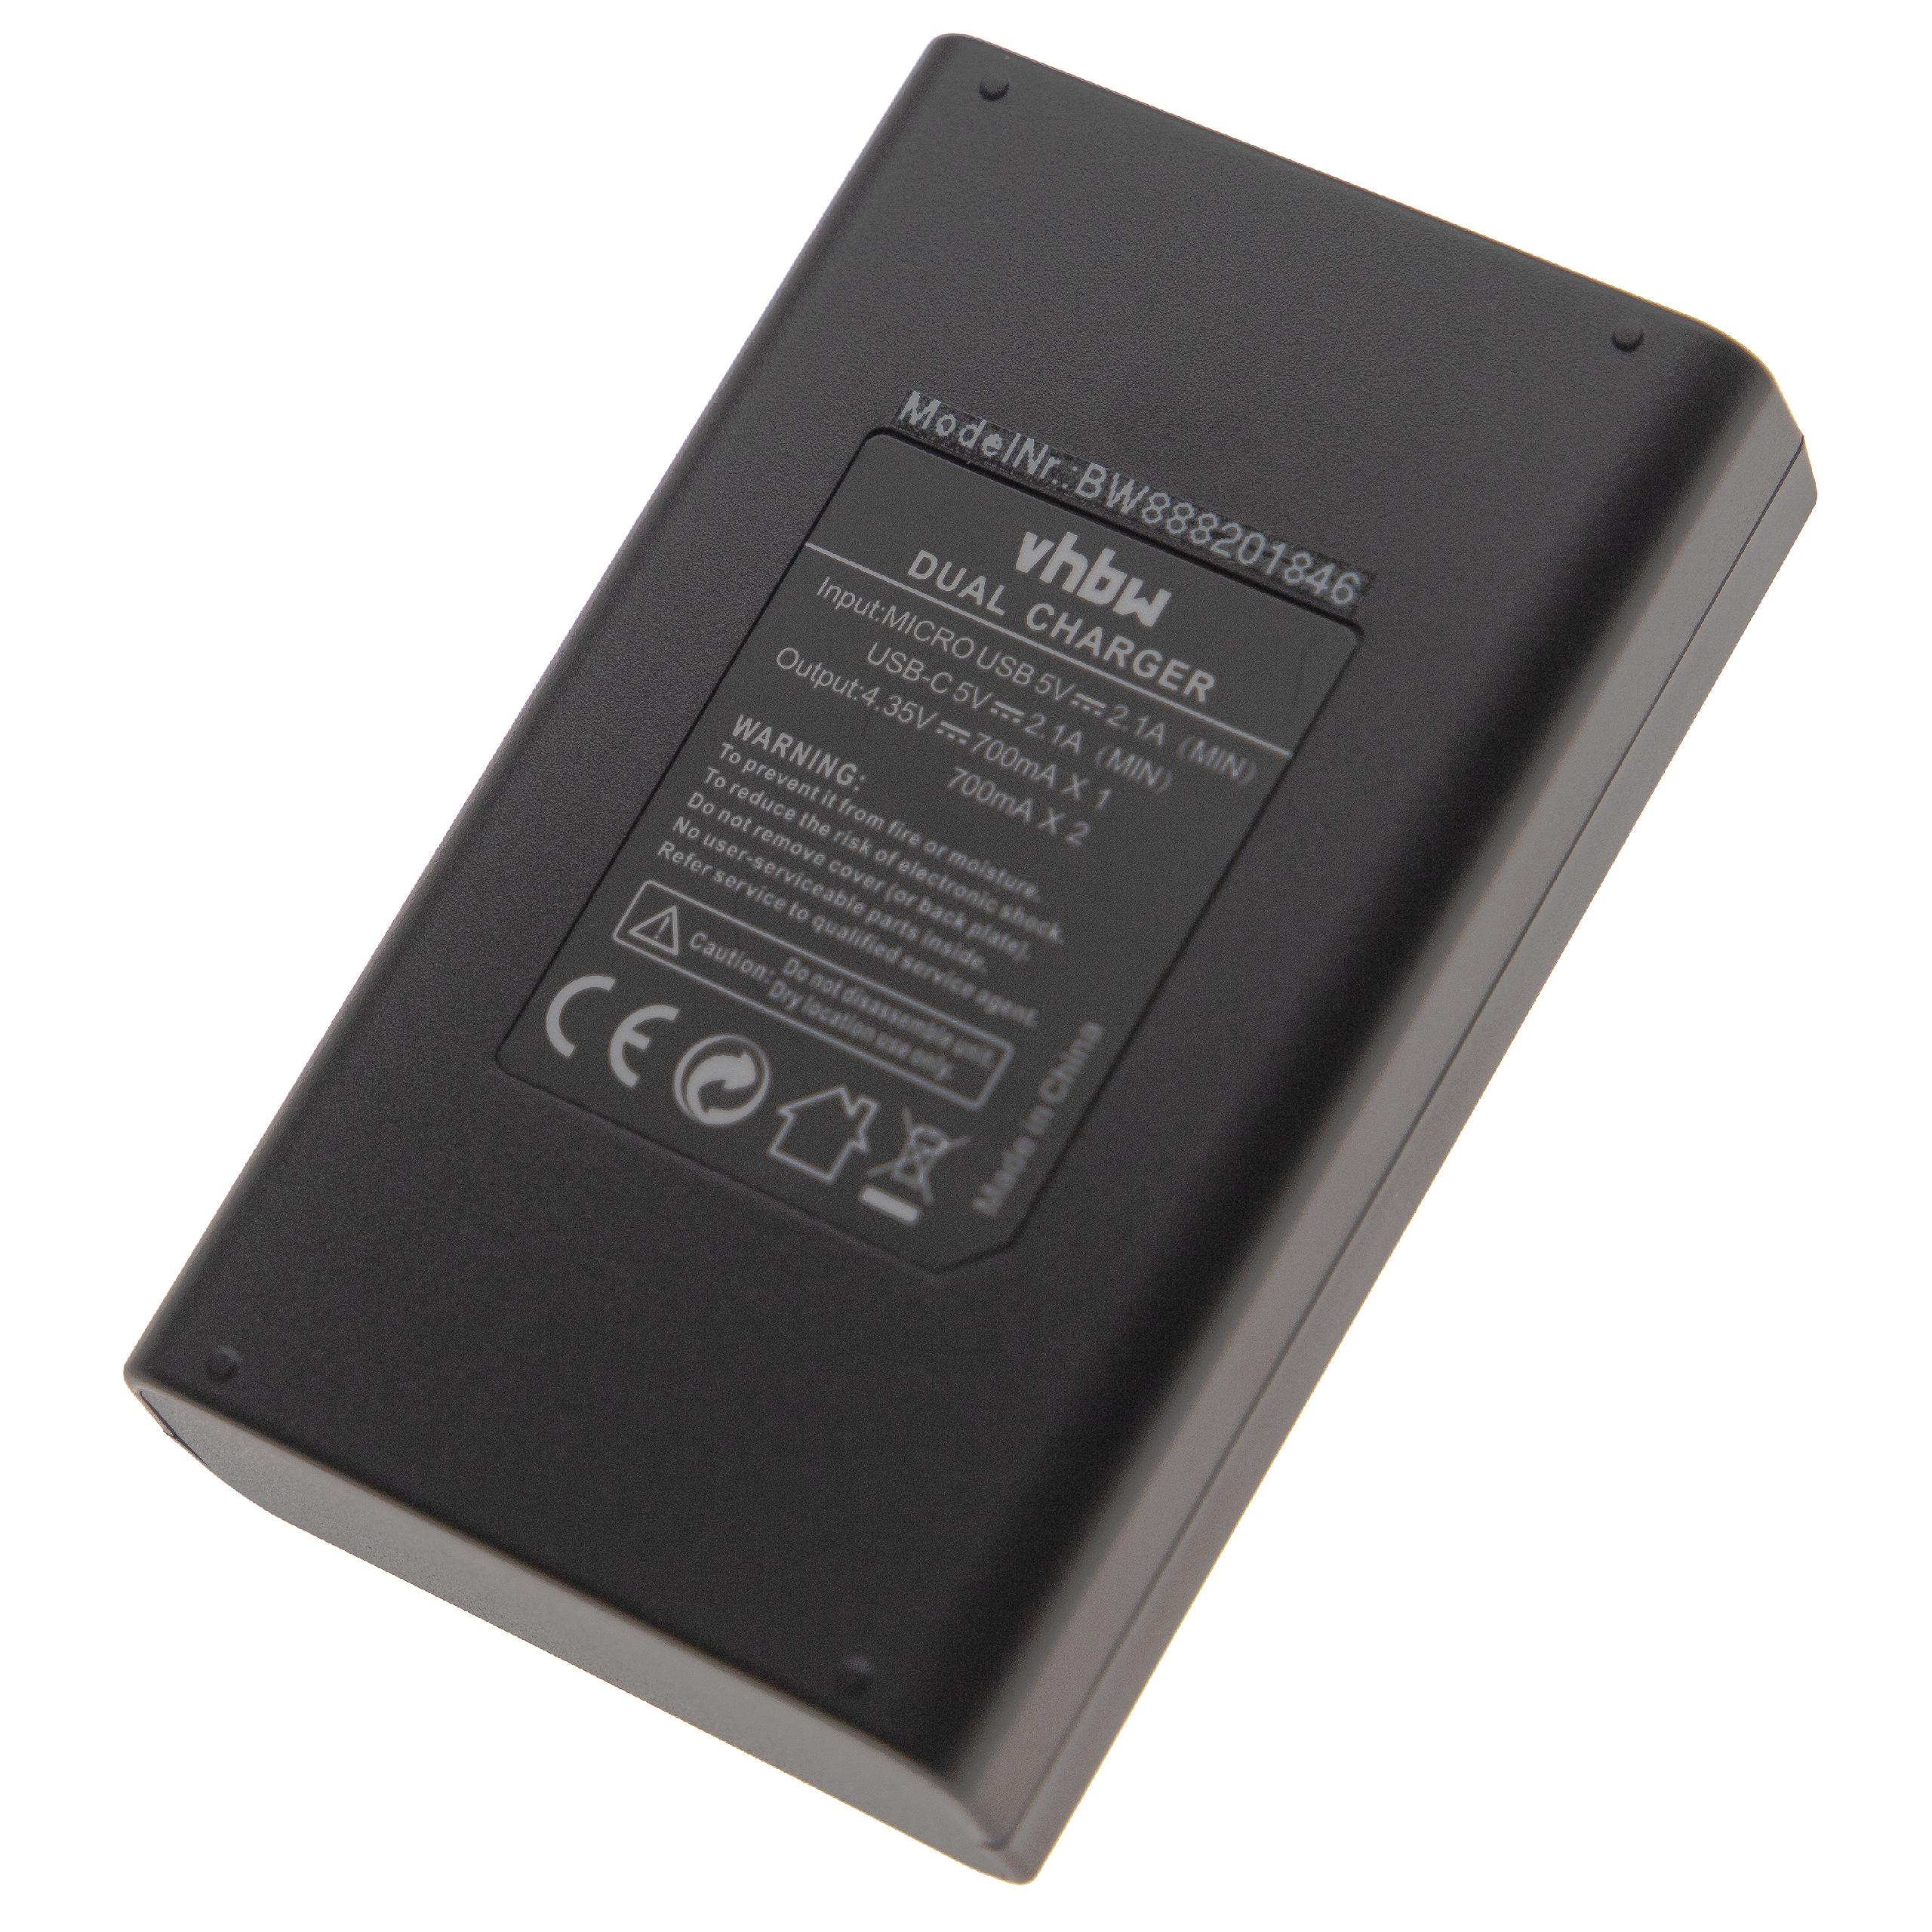 Battery Charger suitable for Hero 5 Camera etc. - 0.7 A, 4.35 V